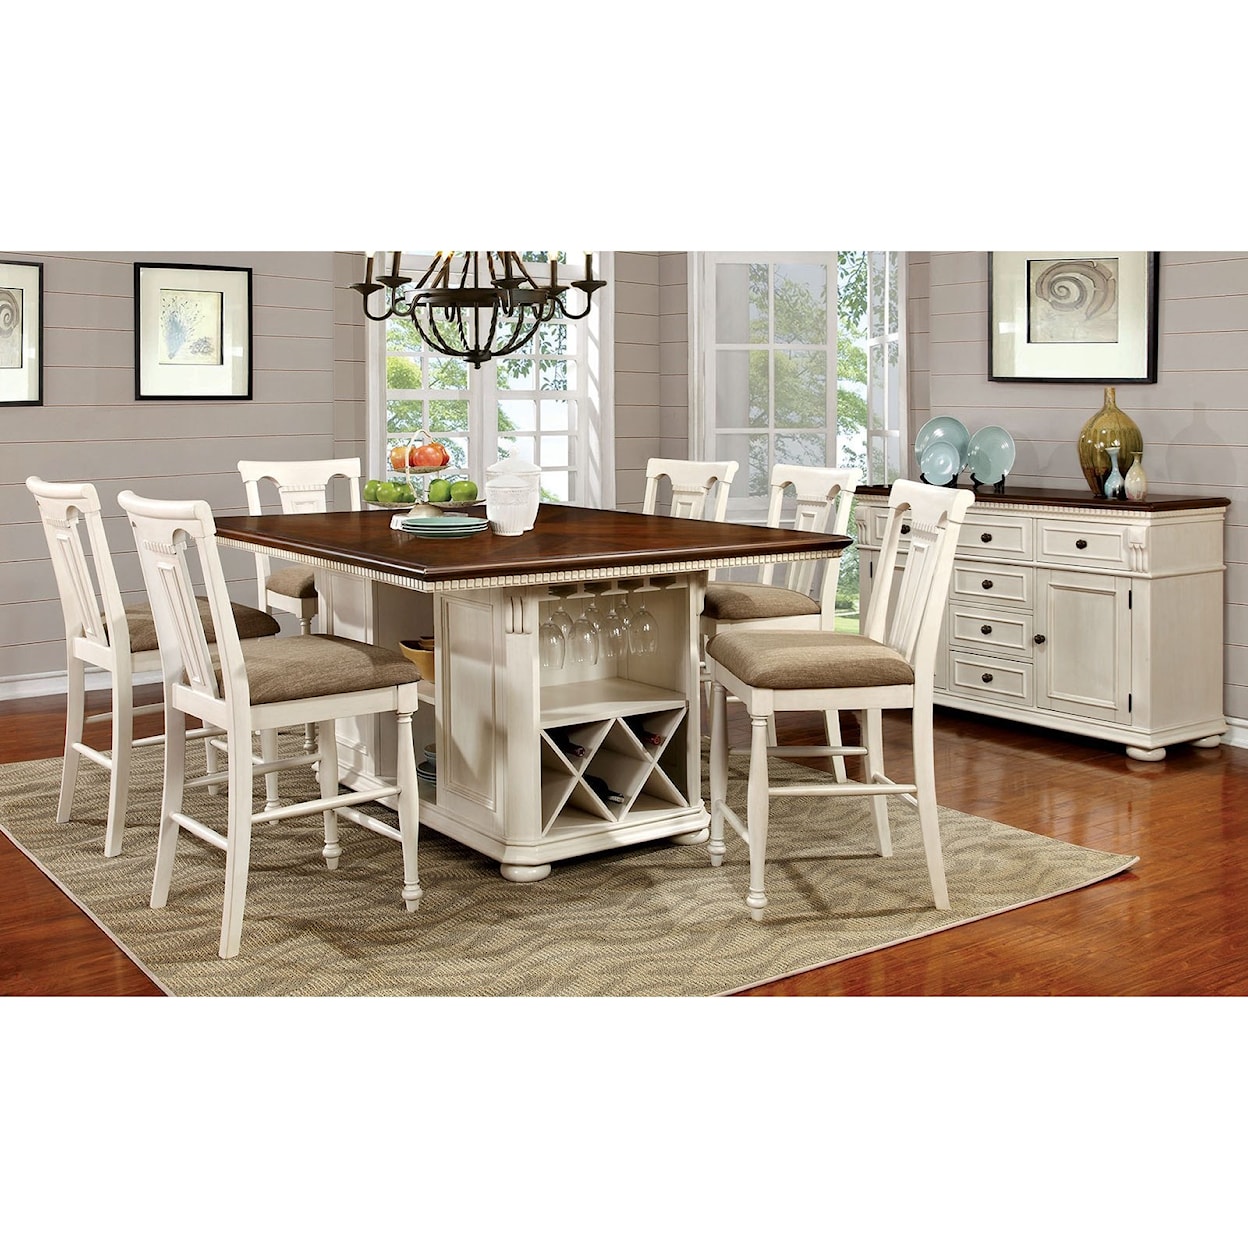 Furniture of America Sabrina Counter Ht. Table